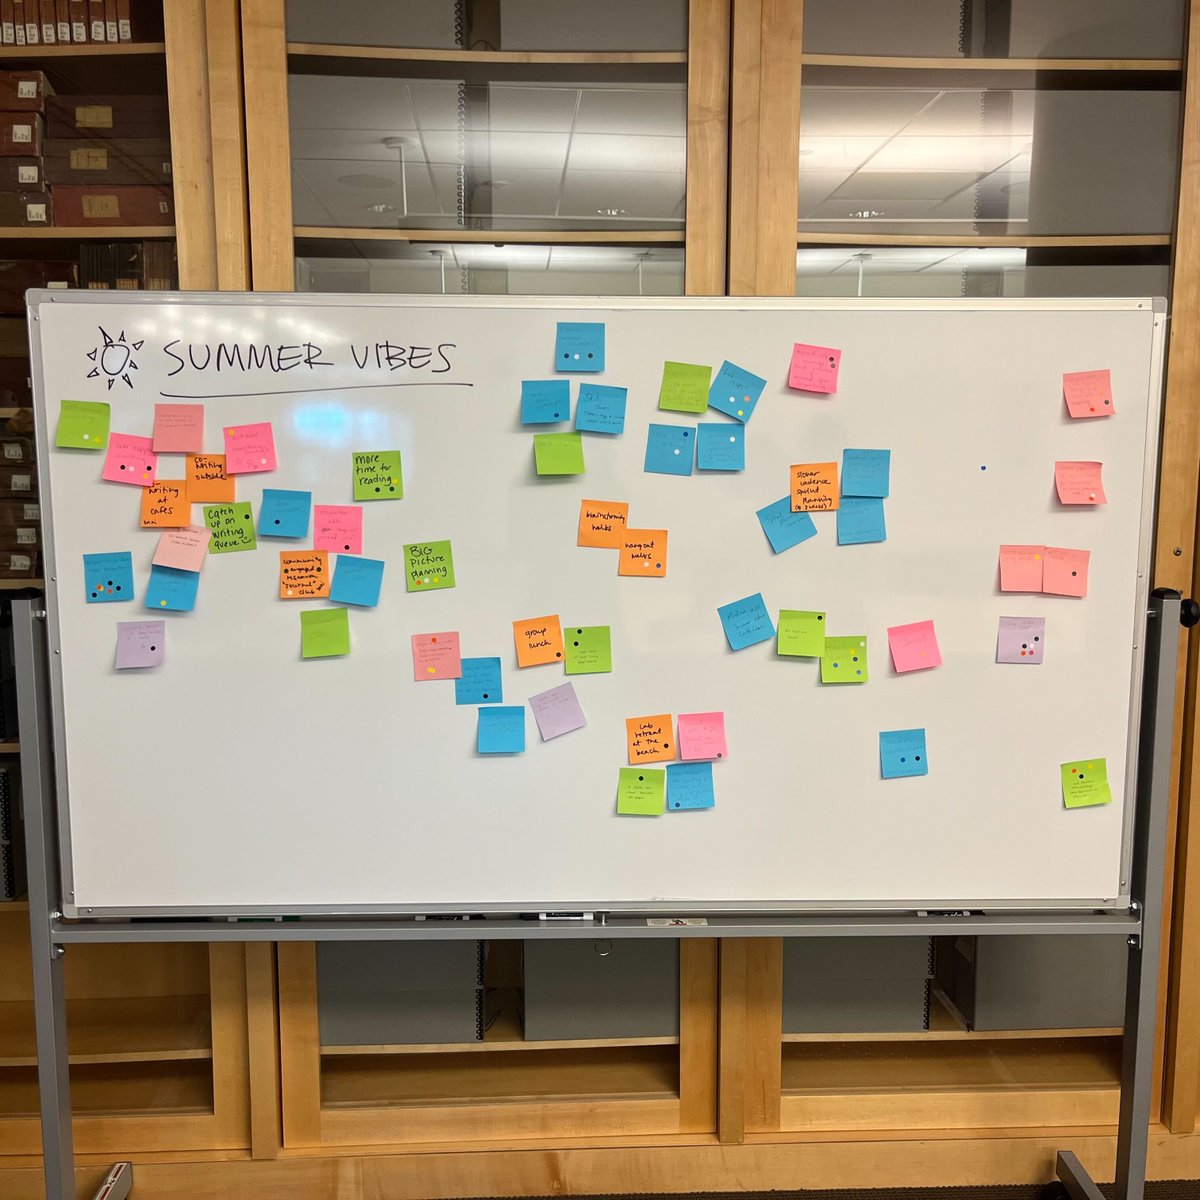 Today was our last lab meeting of the semester. We reflected on our lab structure and activities, going old school with sticky notes on a white board. We also shared our visions for the summer. We look forward to reading groups, working outdoors, skills shares, and more!